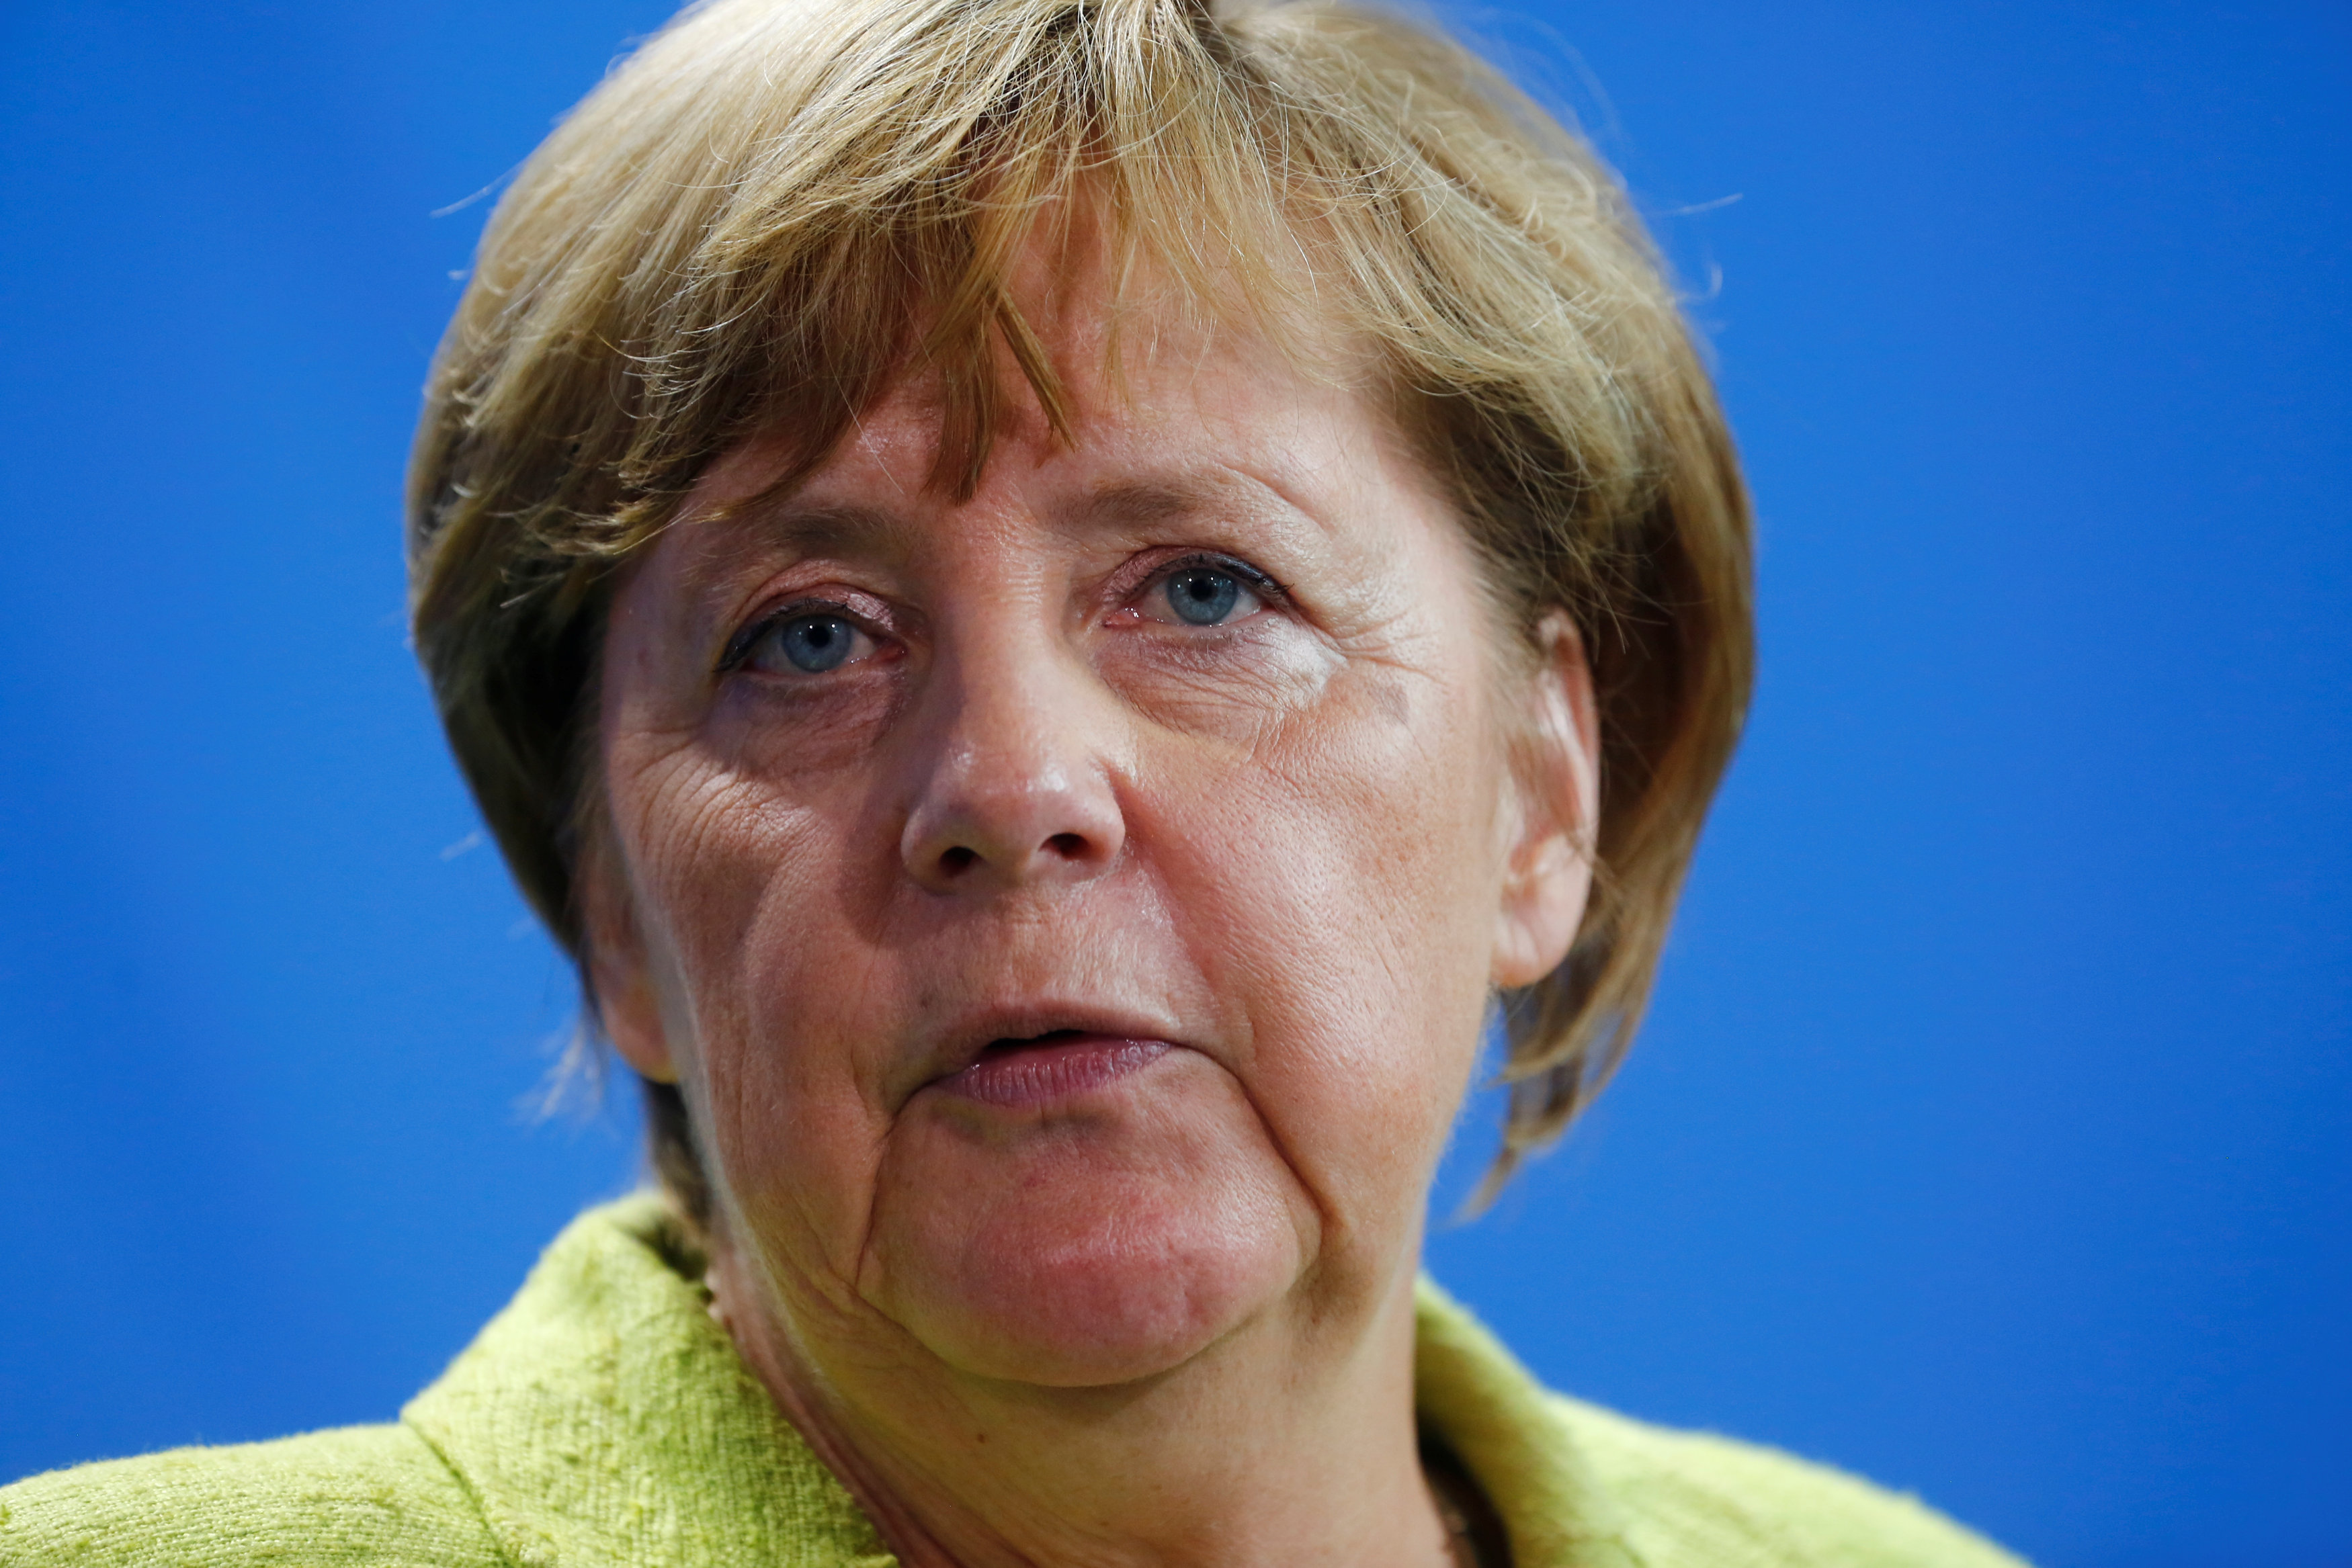 German Chancellor Angela Merkel addresses a news conference at the Chancellery in Berlin